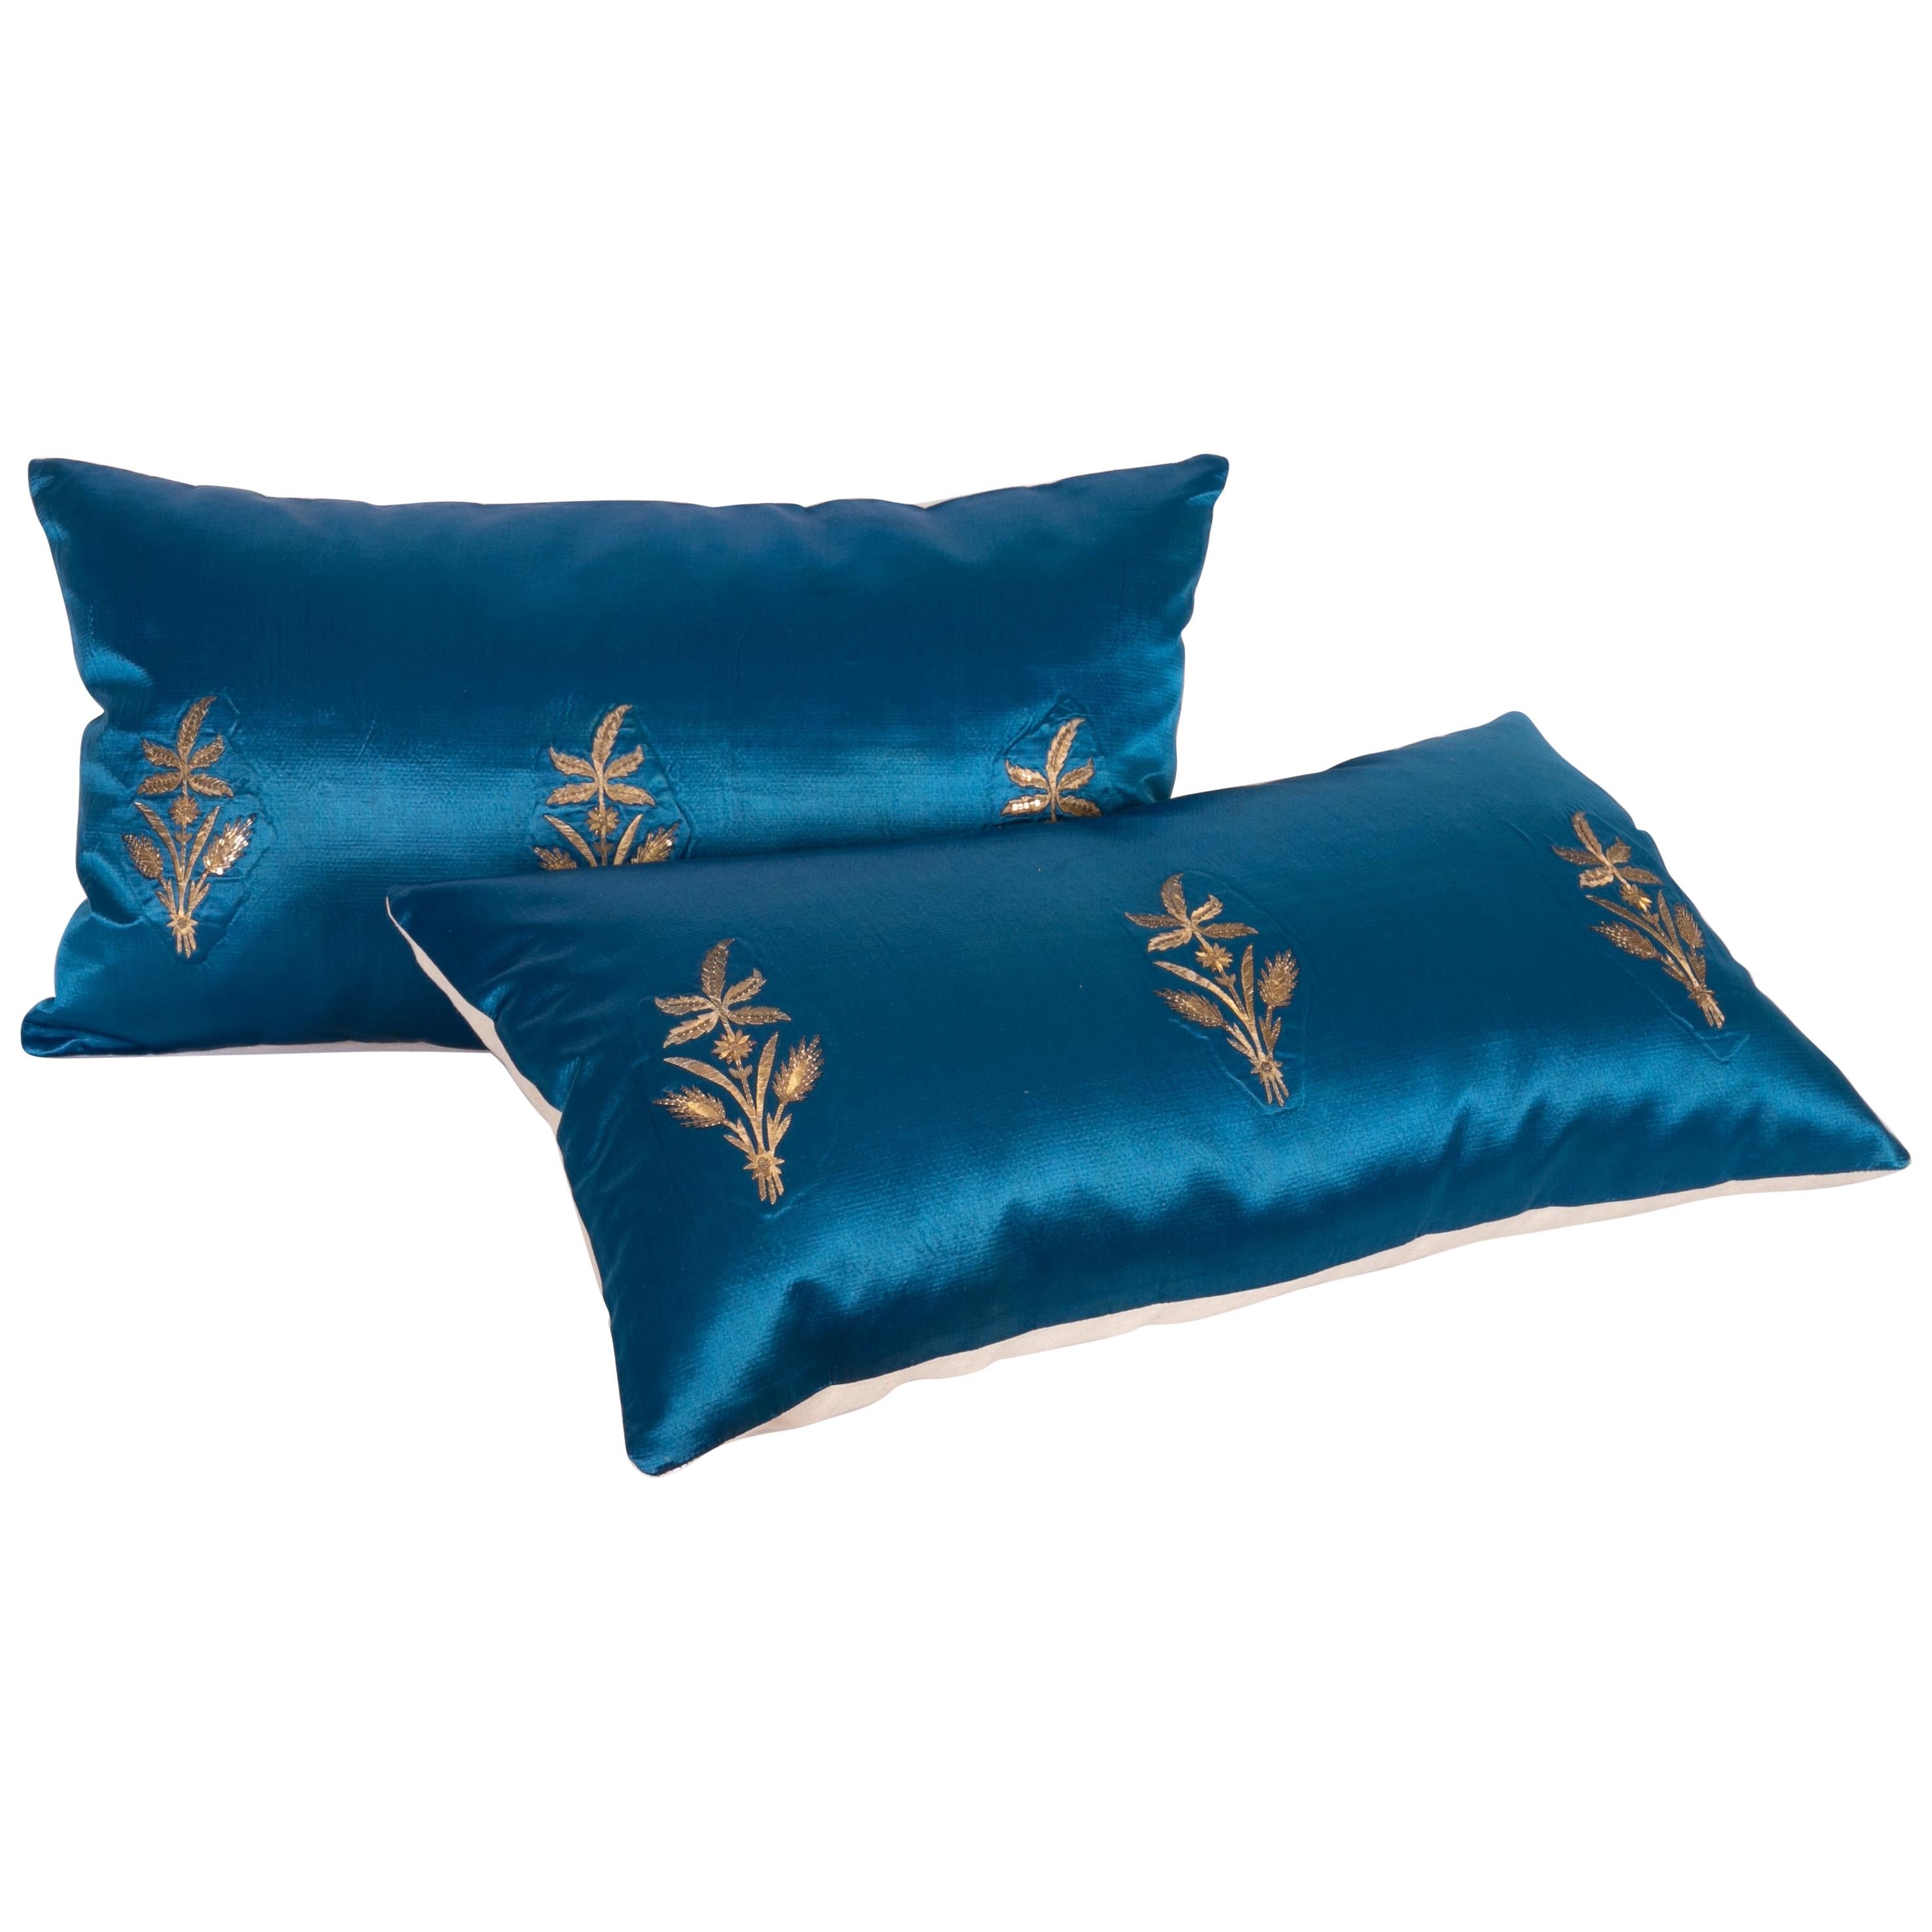 Antique Ottoman, Gold on Blue Pillow Cases, Late 19th c.